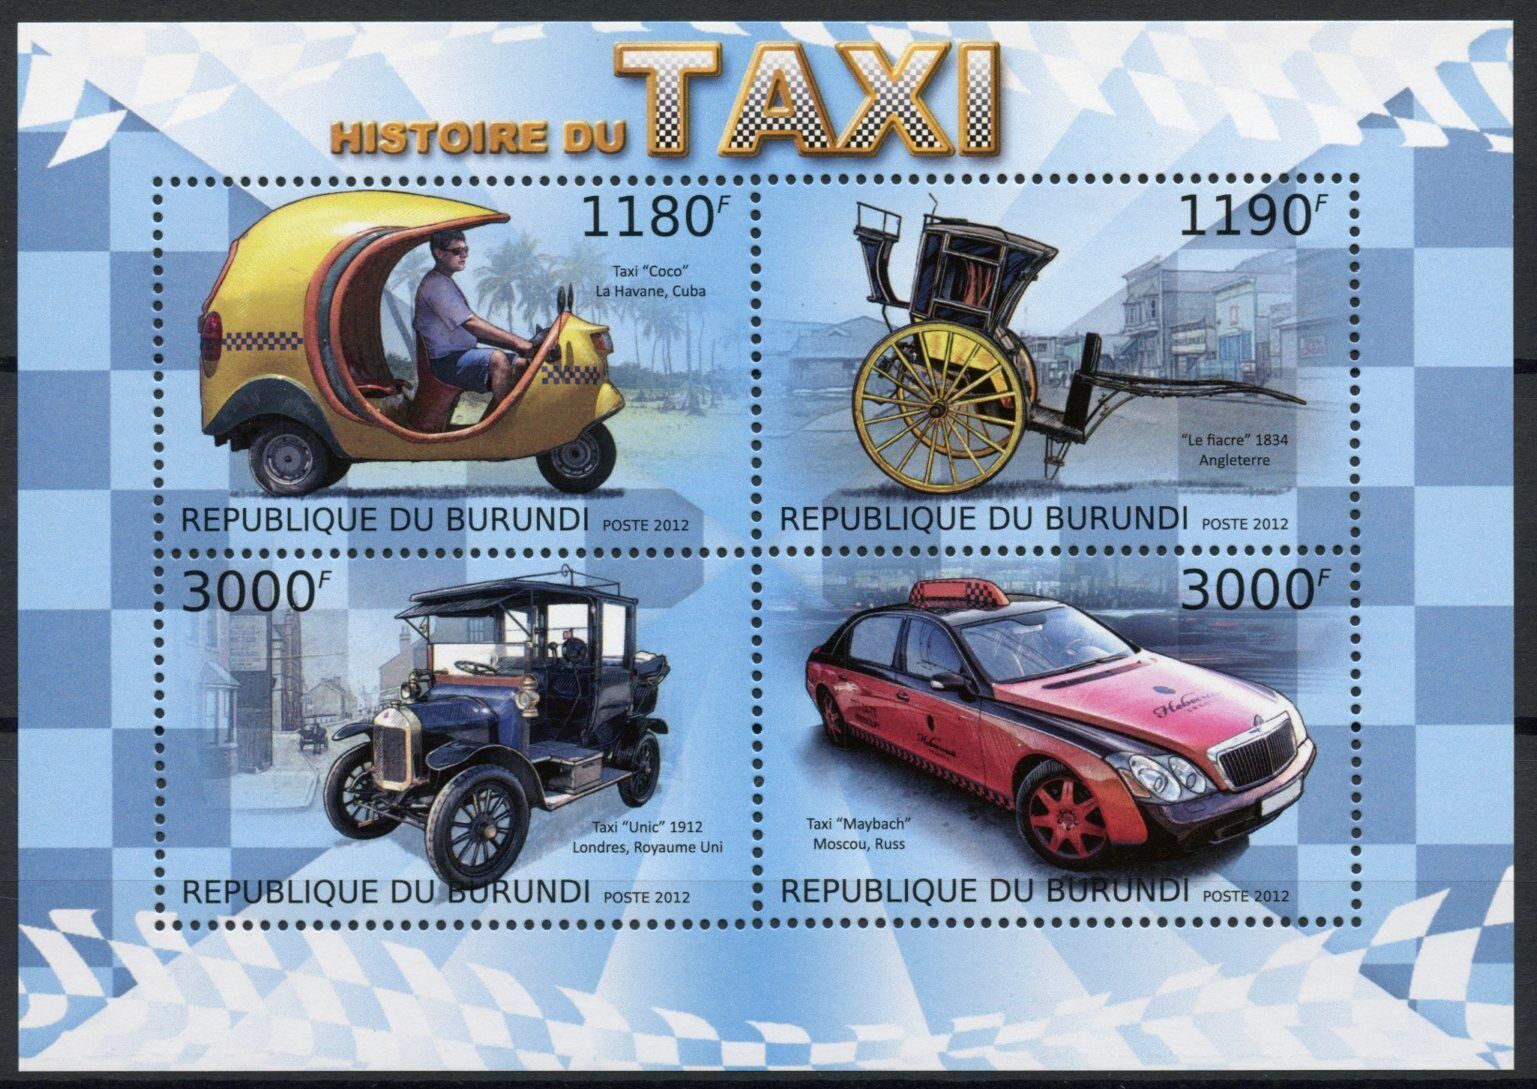 Burundi 2012 MNH Cars Stamps History of Taxi Coco Cab Maybach Unic 4v M/S